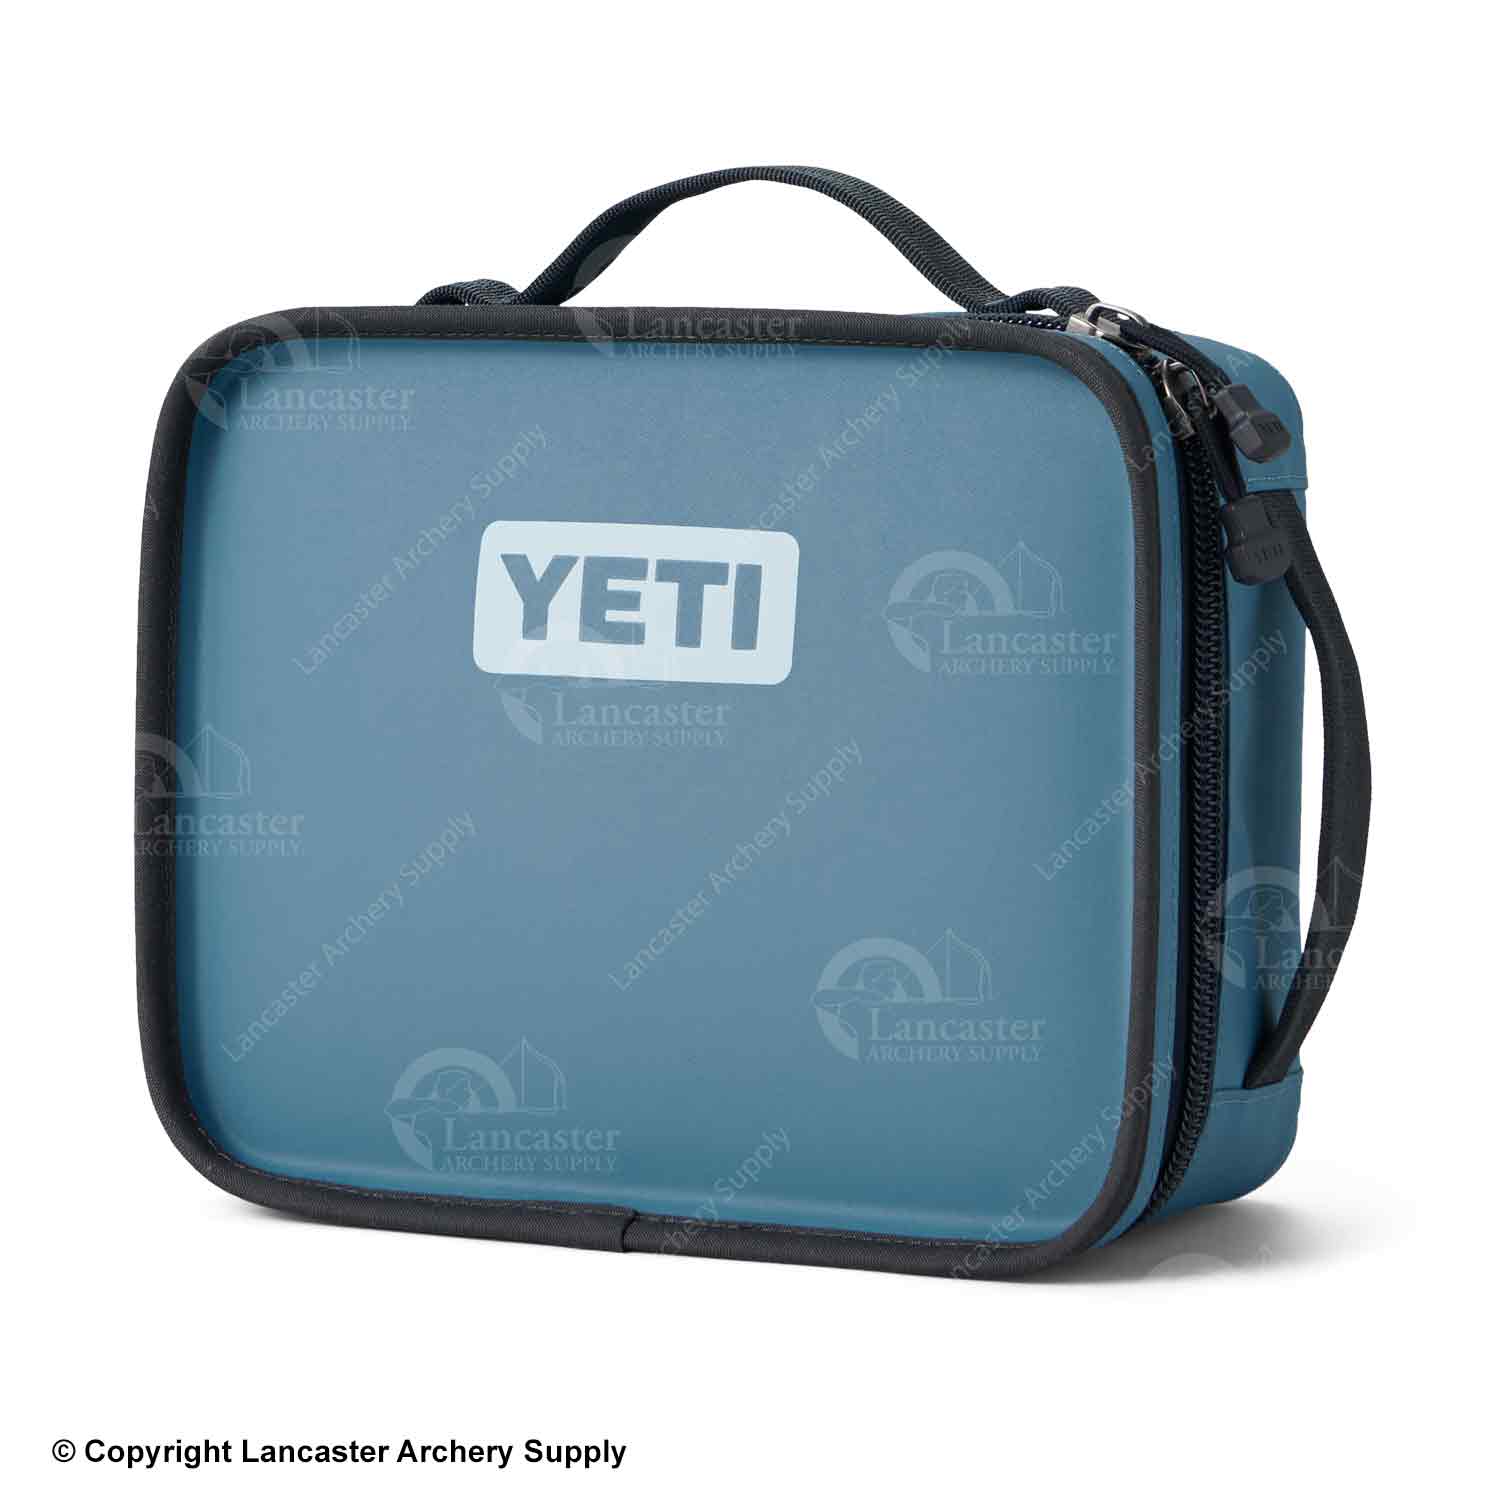 Quality Equipment is Your Local Authorized YETI Dealer 